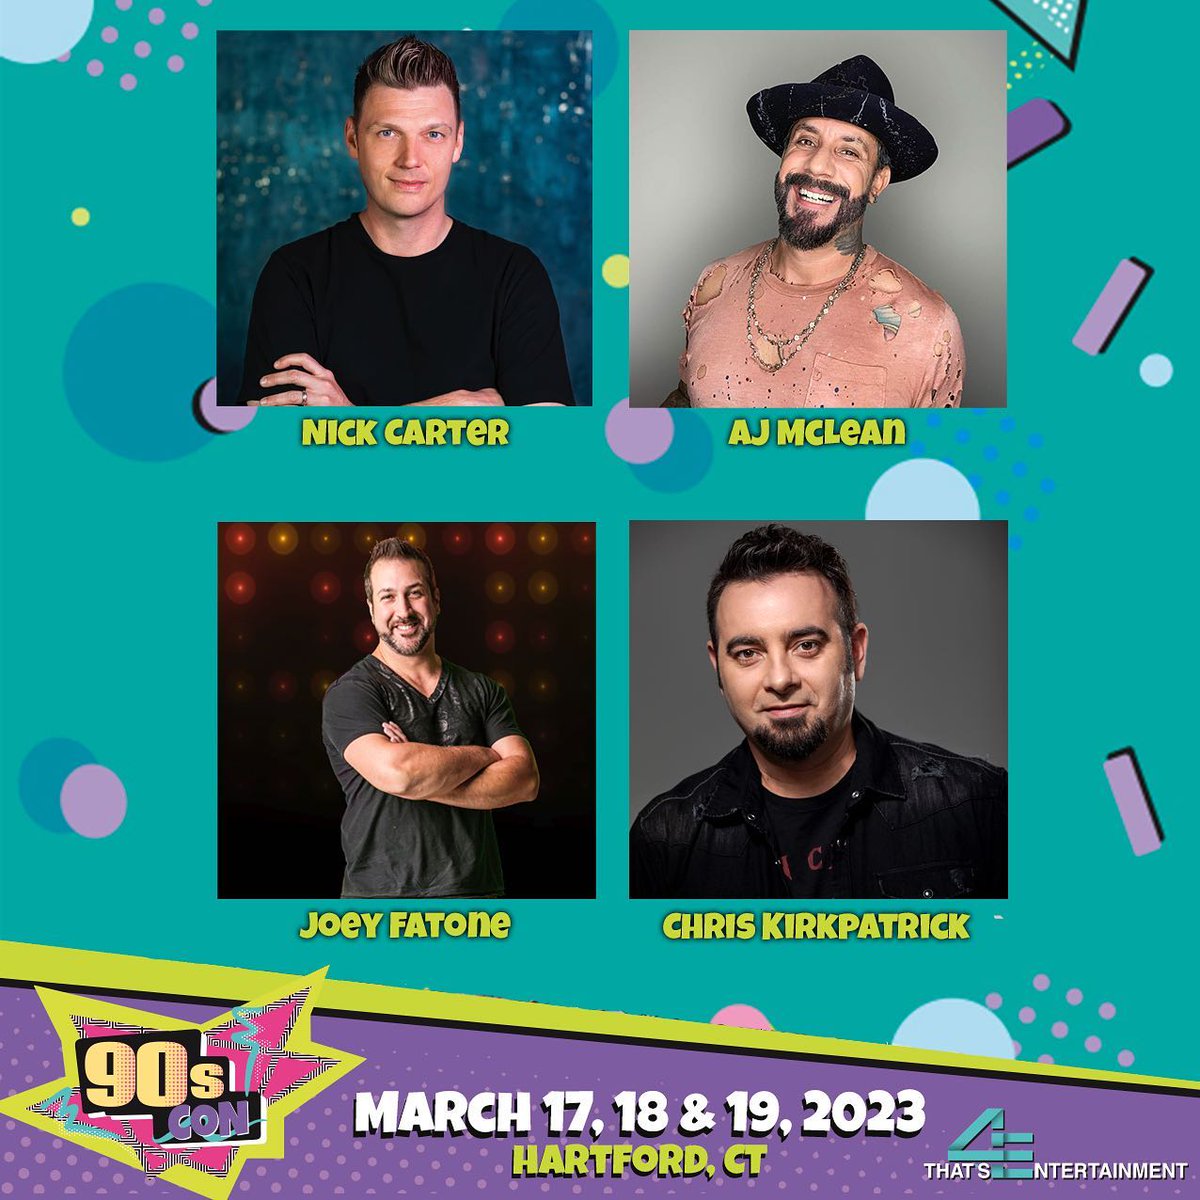 Nick Carter joins the guest list for 90's Con! 

Meet Nick and other Boy Band icons, March 17-19 in Hartford, CT. 

All info - thats4entertainment.com/90scon
#nickcarter #bsb #backstreetboys #90scon #thats4entertainment #fullempirepromotions